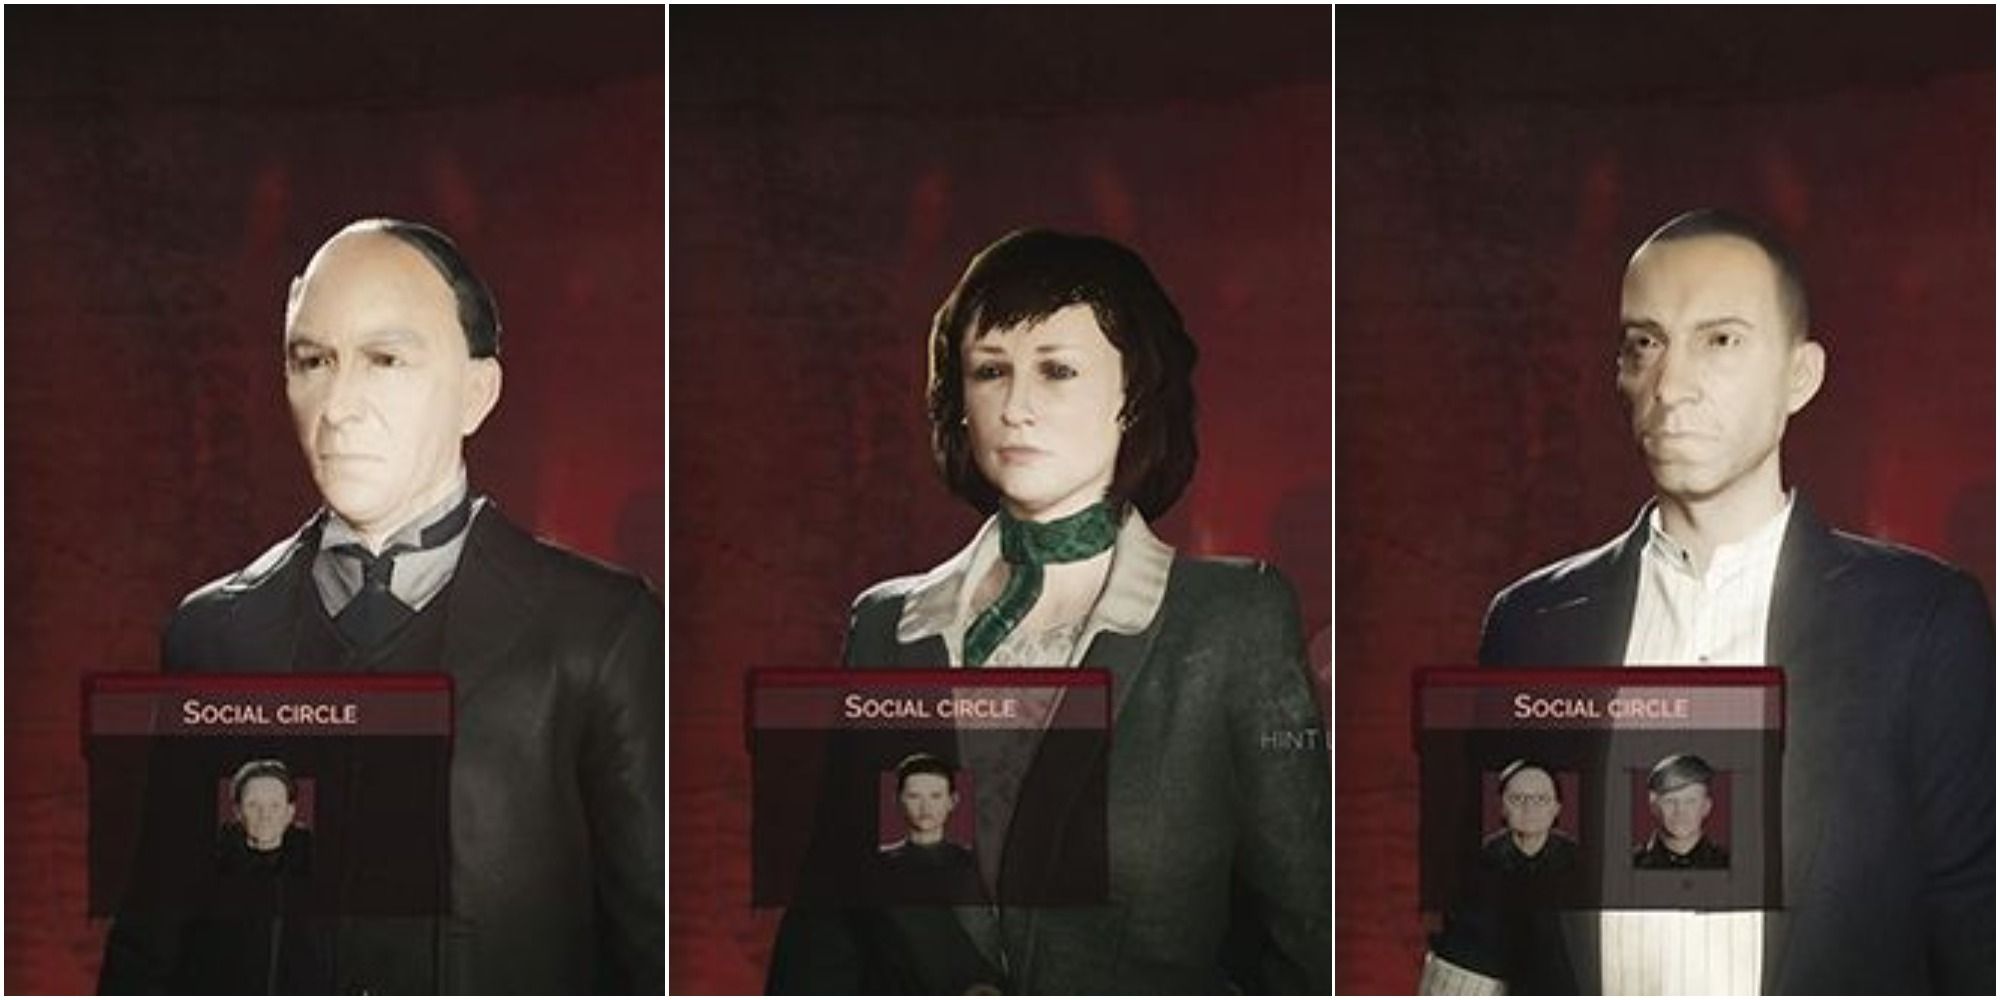 Avery Cork, Carolyn price and Seymour Fishburn in the Citizens menu, left to right